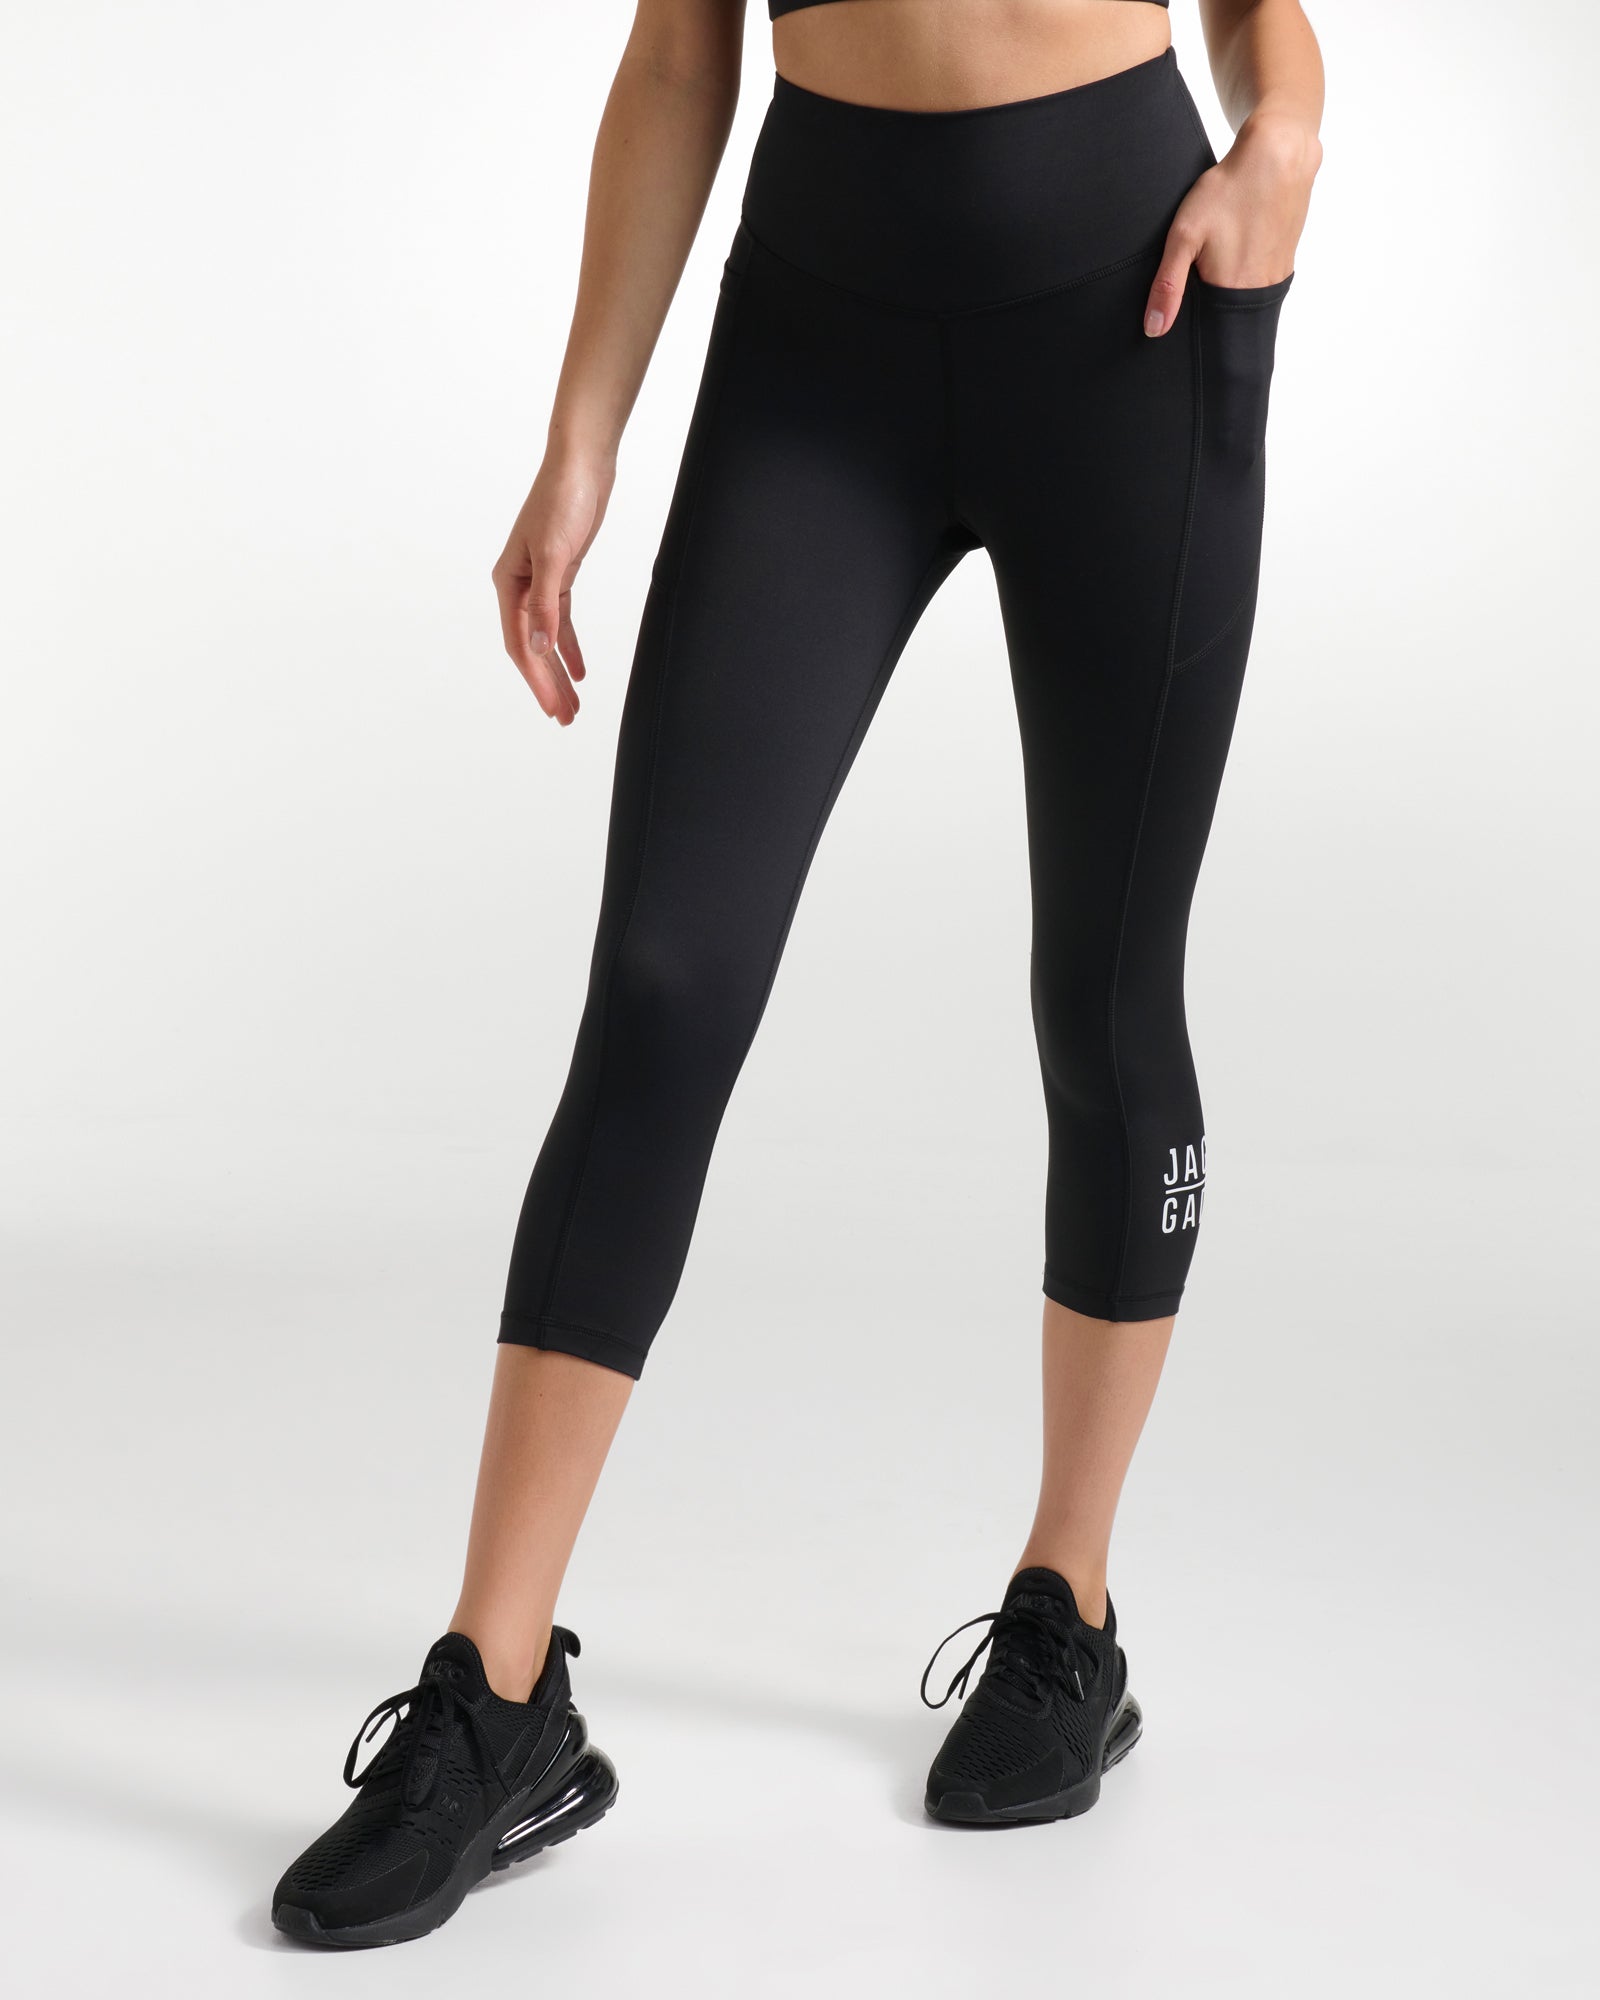 High Waist Tapered Joggers With Pocket Tanks For Women Ideal For Running,  Yoga, Gym And Workouts From Xiaobaigou, $20.44